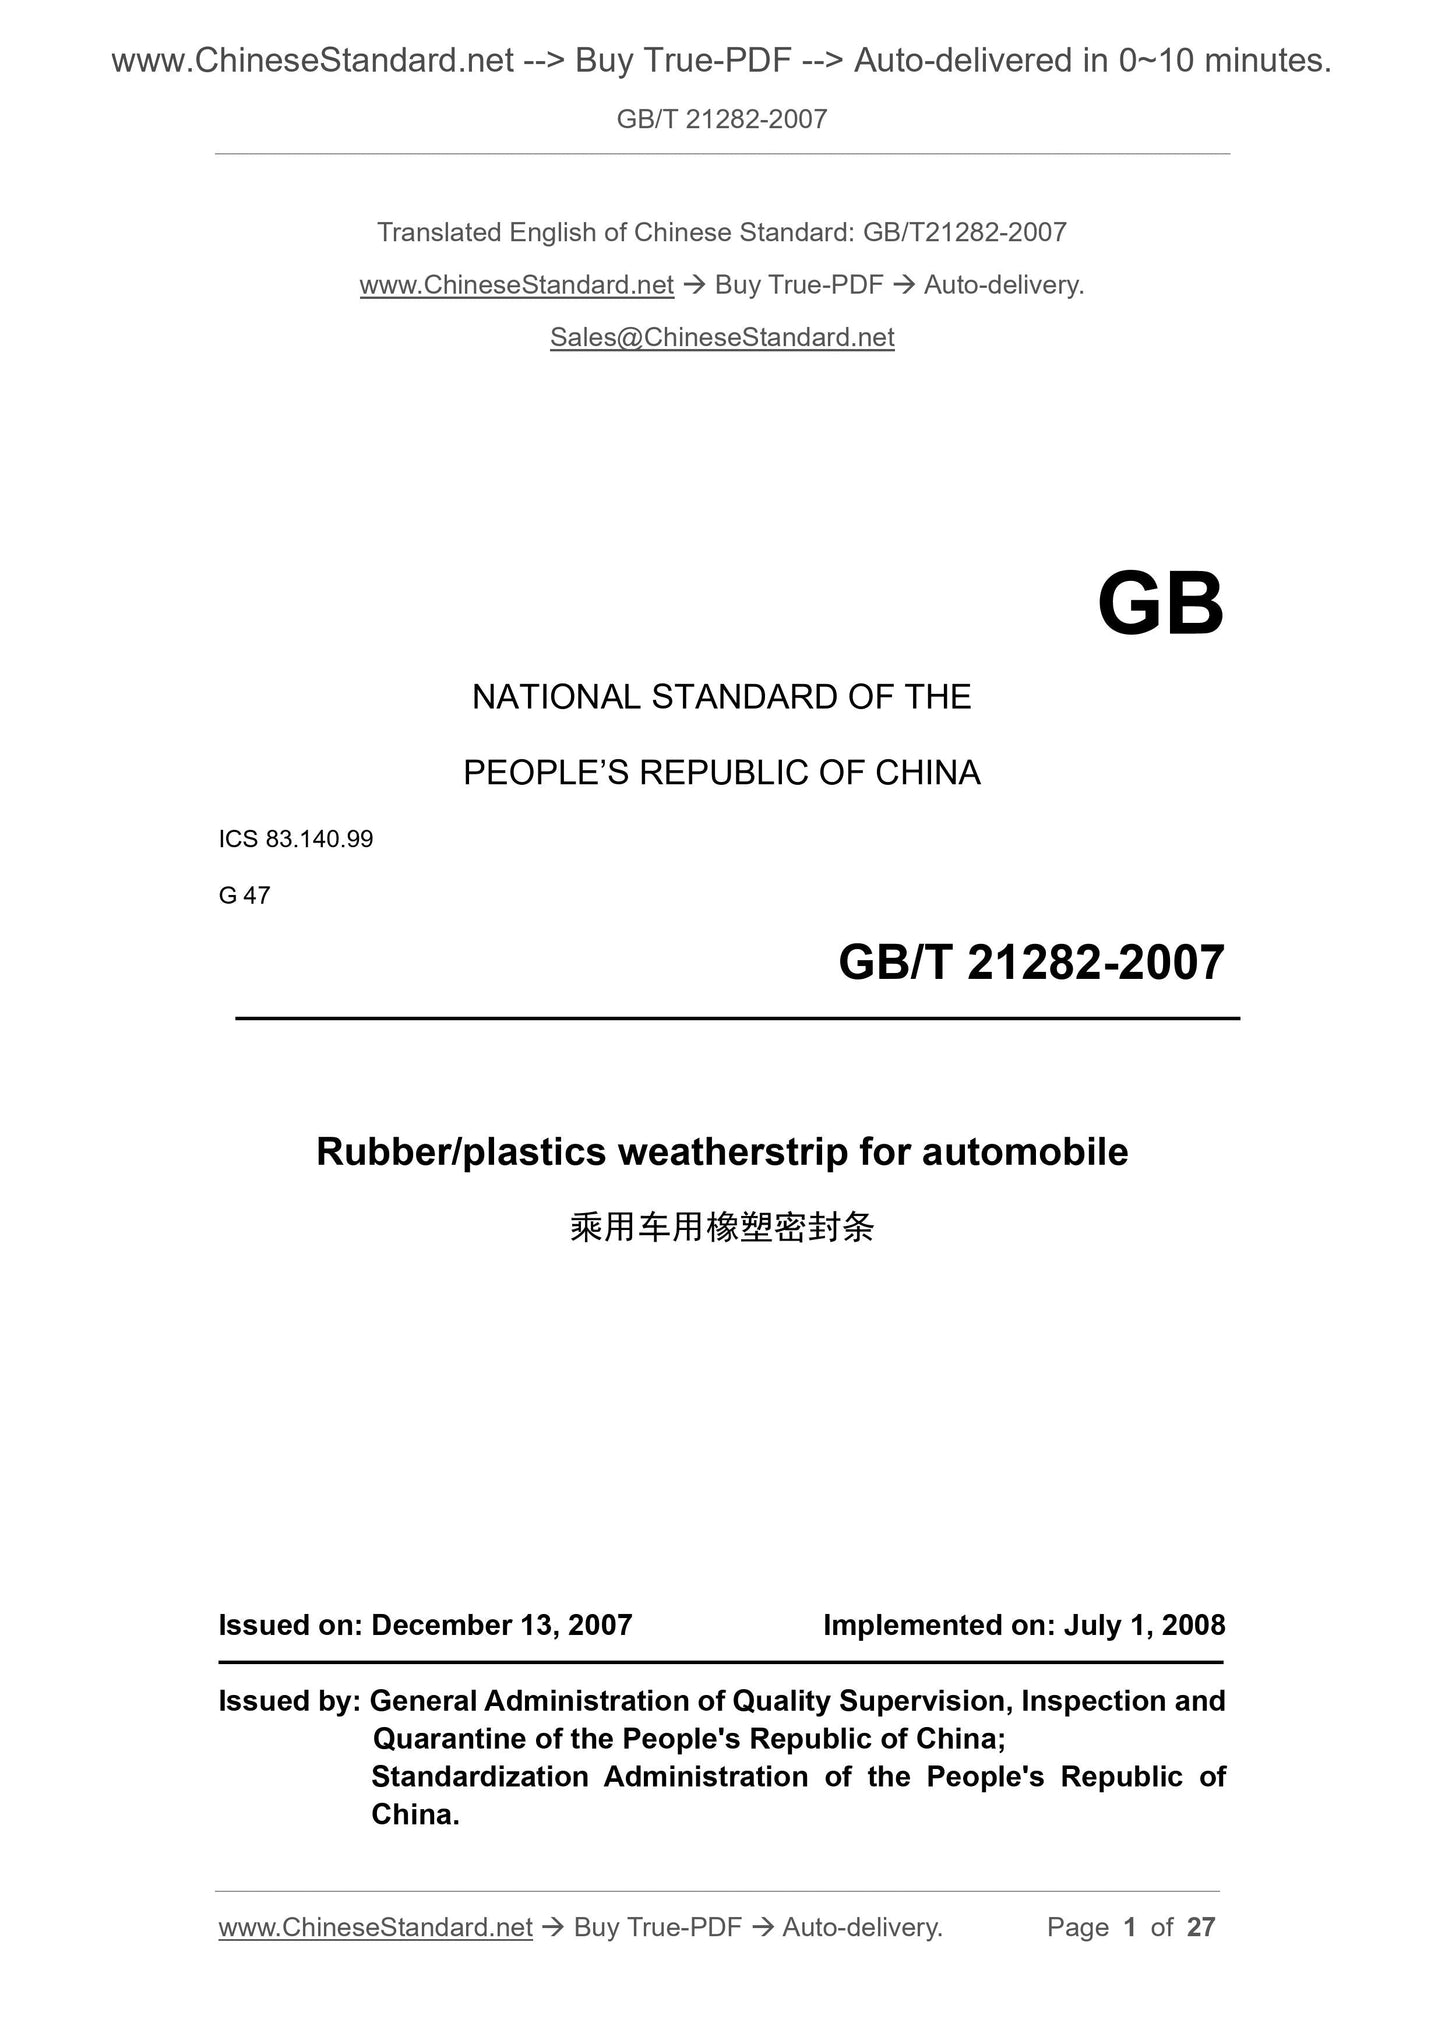 GB/T 21282-2007 Page 1